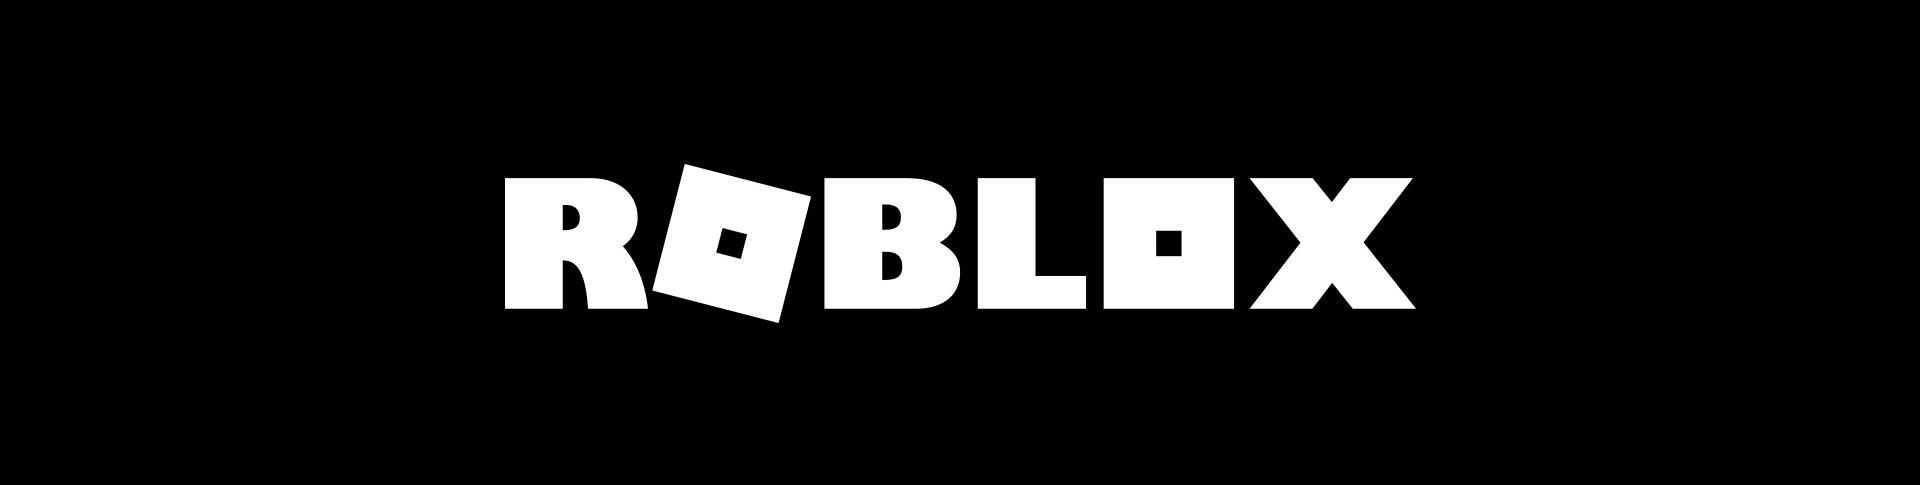 How to Draw Roblox Logo - Step by Step 